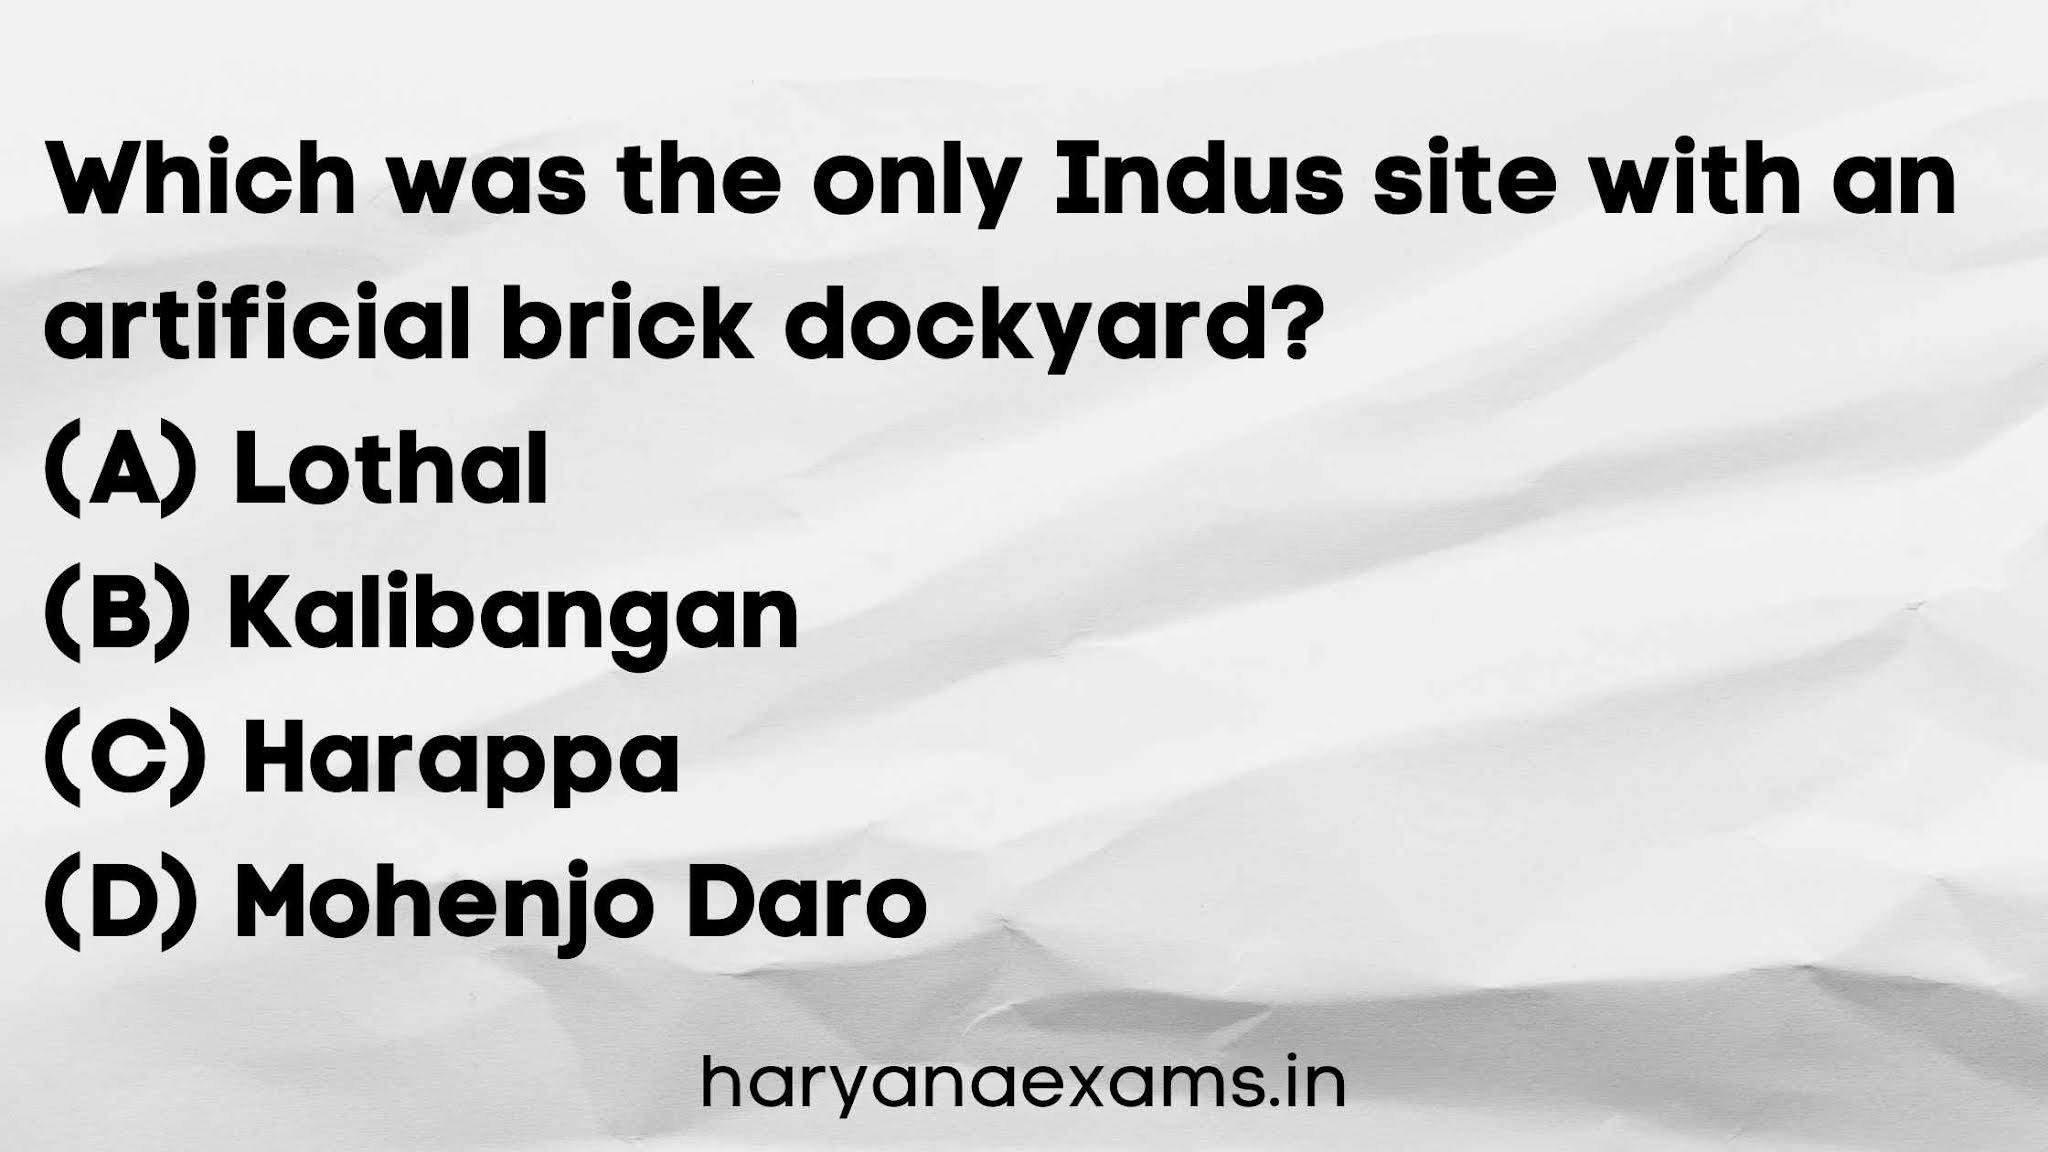 Which was the only Indus site with an artificial brick dockyard?   (A) Lothal   (B) Kalibangan   (C) Harappa   (D) Mohenjo Daro